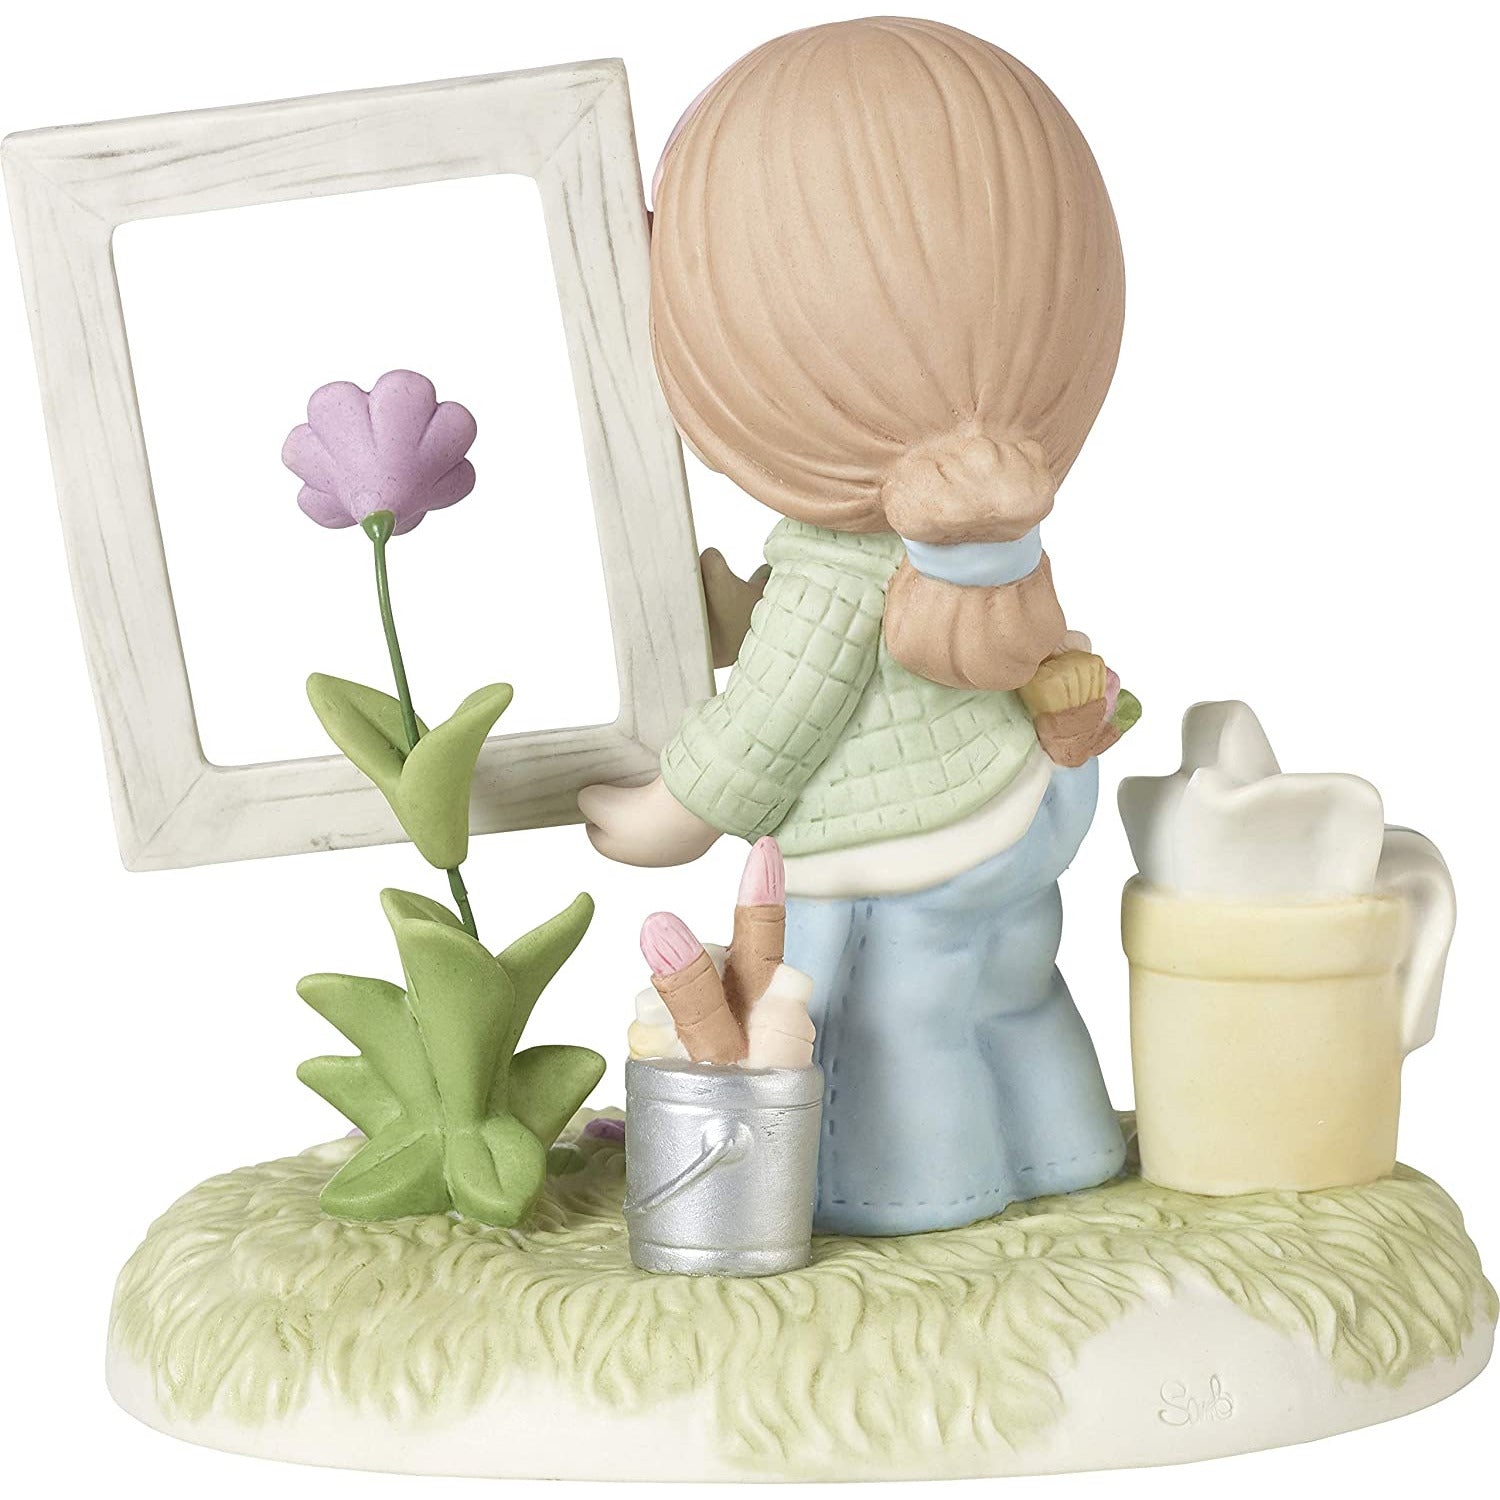 Precious Moments Girl Holding Frame Around Flower 182013 to God Be The Glory Bisque Porcelain Figurine, Multi